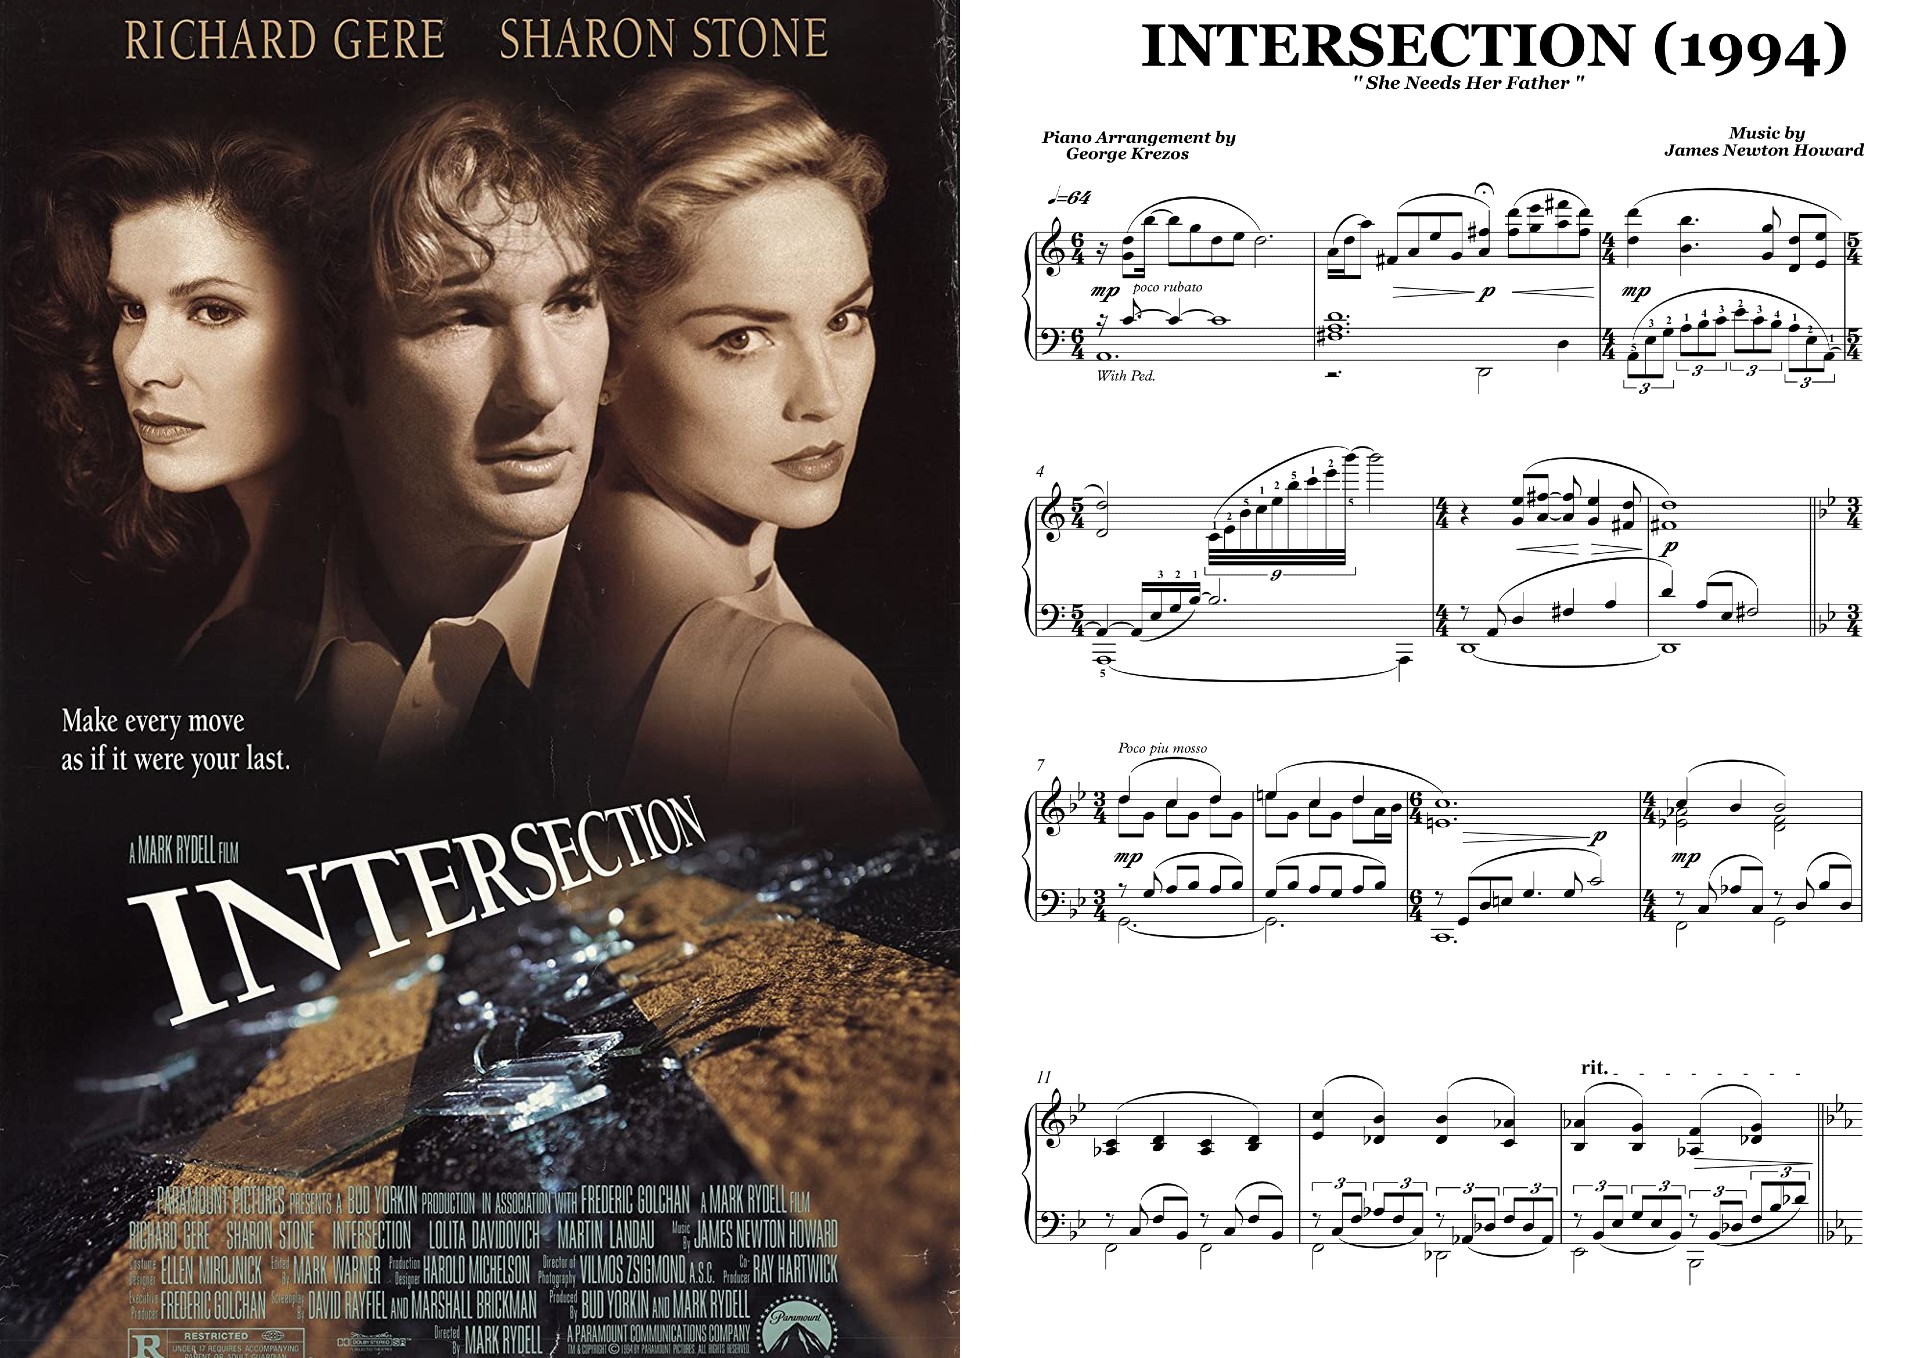 INTERSECTION - She Needs Her Father.jpg